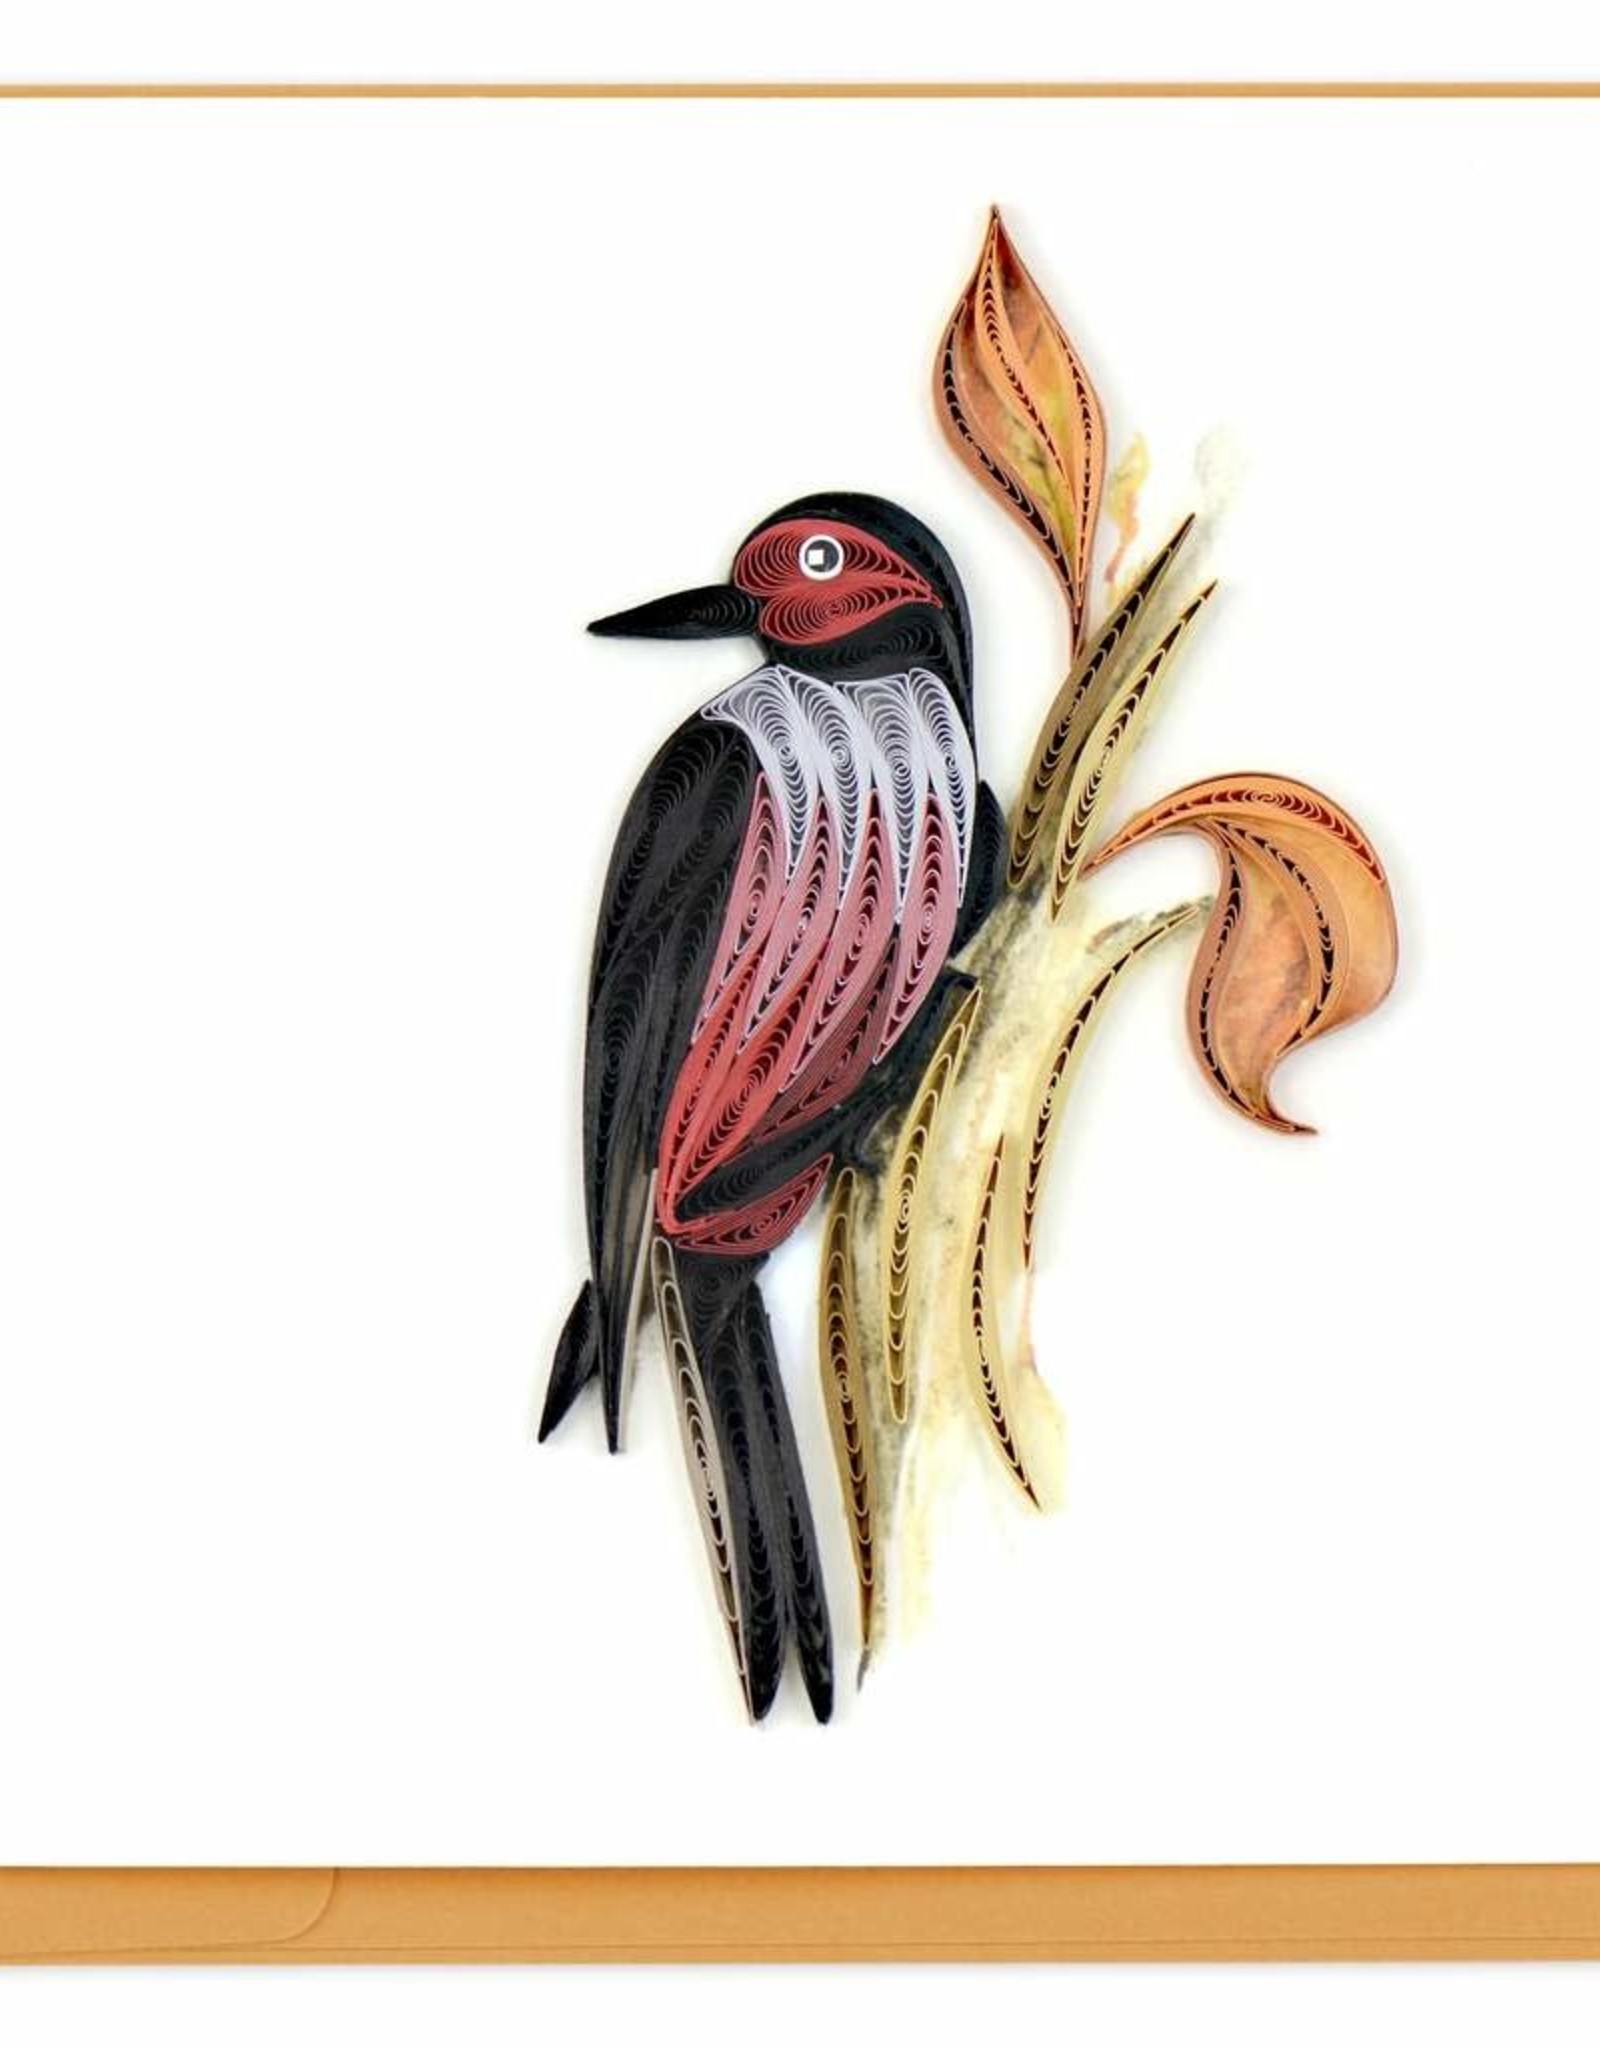 Quilling Card Quilled Lewis's Woodpecker Greeting Card